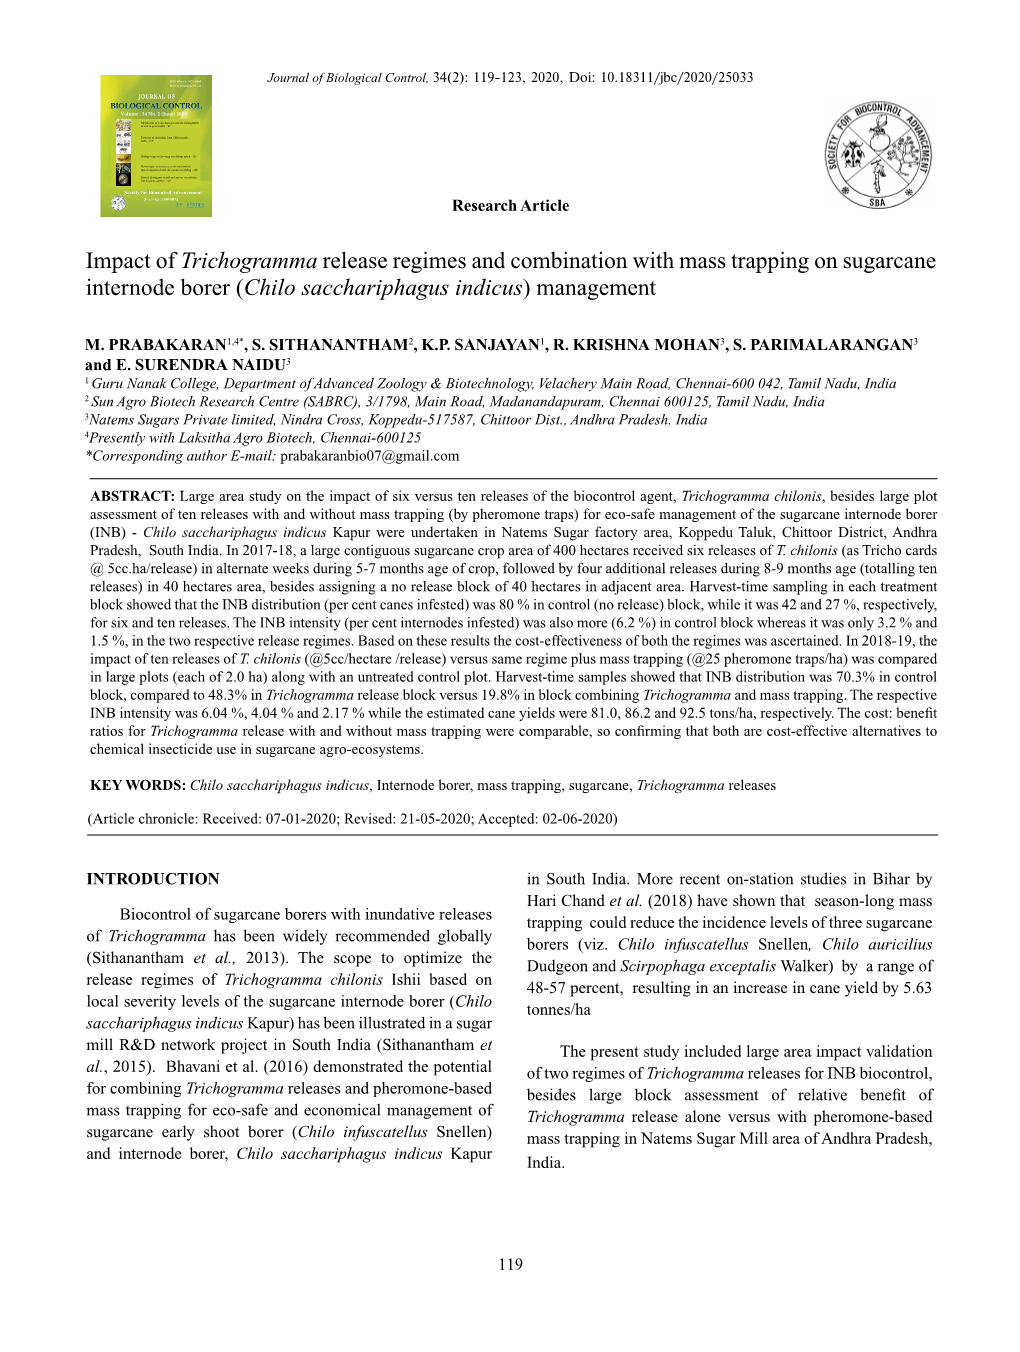 Impact of Trichogramma Release Regimes and Combination with Mass Trapping on Sugarcane Internode Borer (Chilo Sacchariphagus Indicus) Management